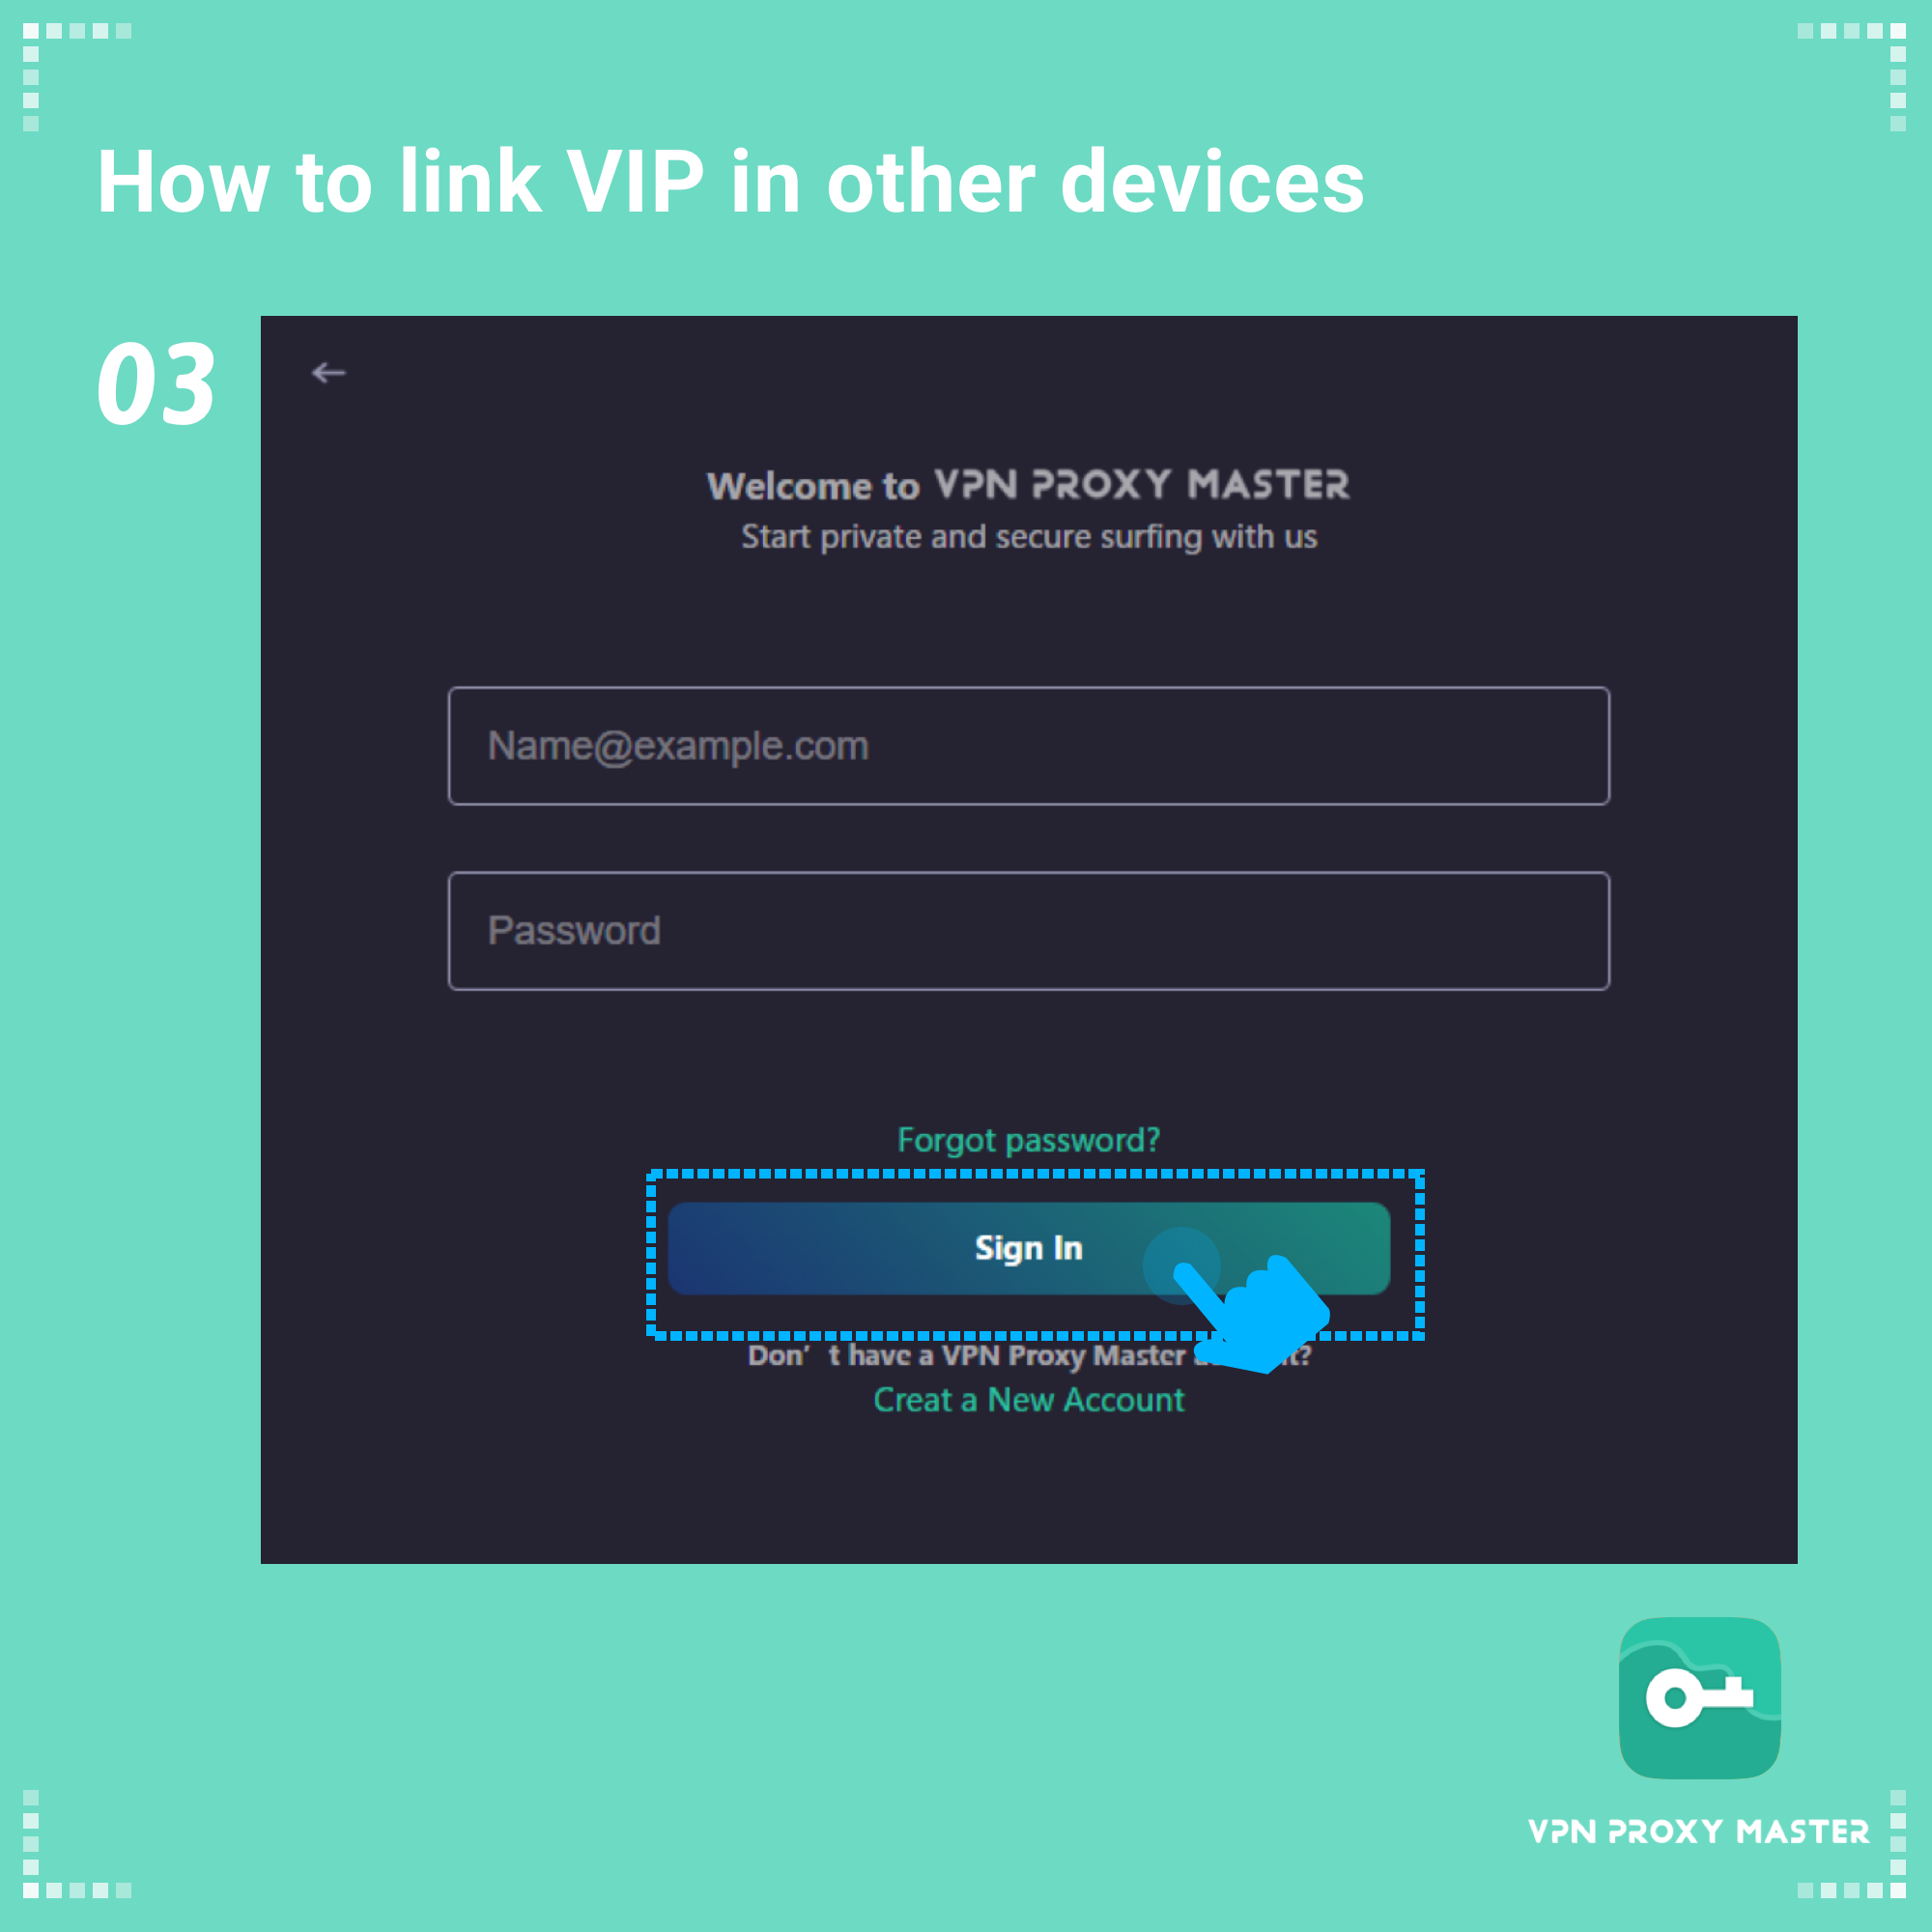 win-How_to_link_VIP_in_other_devices2.png